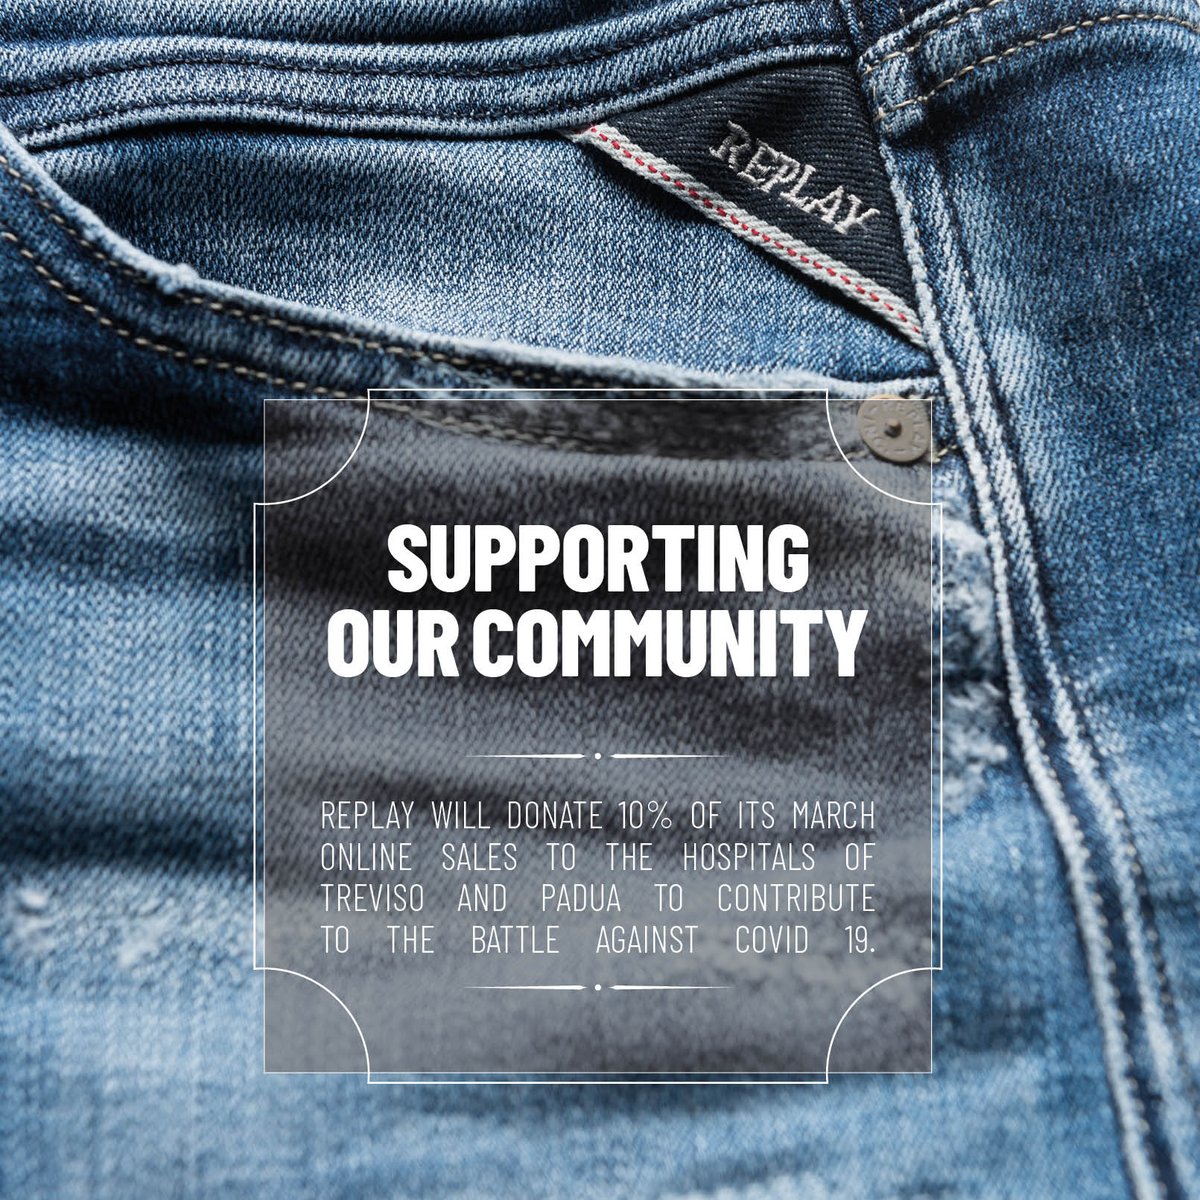 behalve voor grootmoeder hebzuchtig Replay Blue Jeans on Twitter: "Together we are supporting our community.  Thanks to your purchases, we'll be donating 10% of our March online sales  to the hospitals of Treviso and Padua. Together